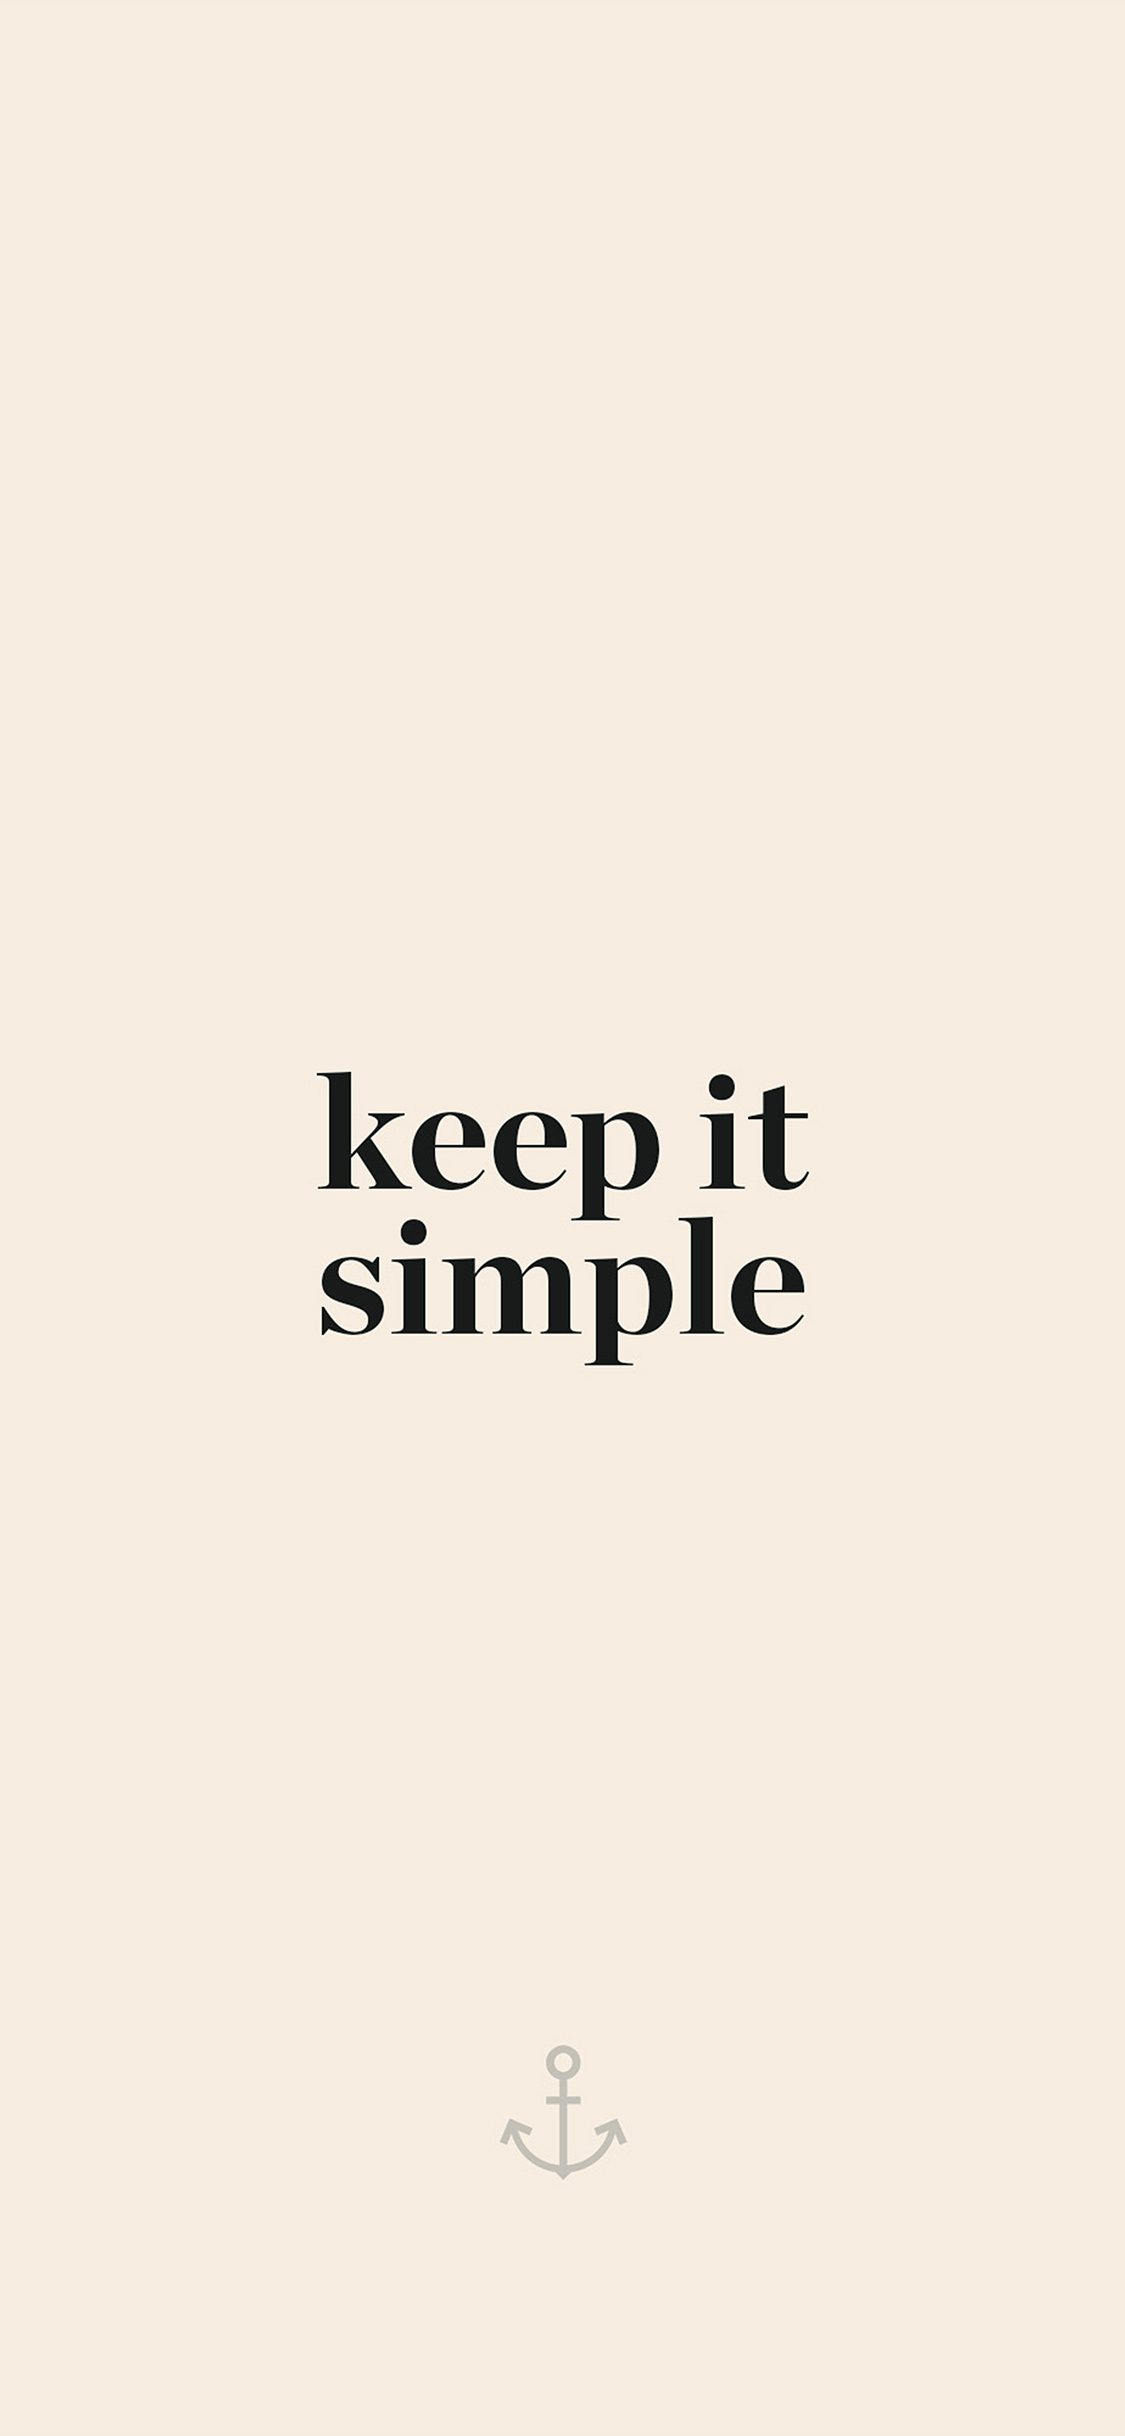 iPhone X wallpaper. keep it simple word quote beige illustration art